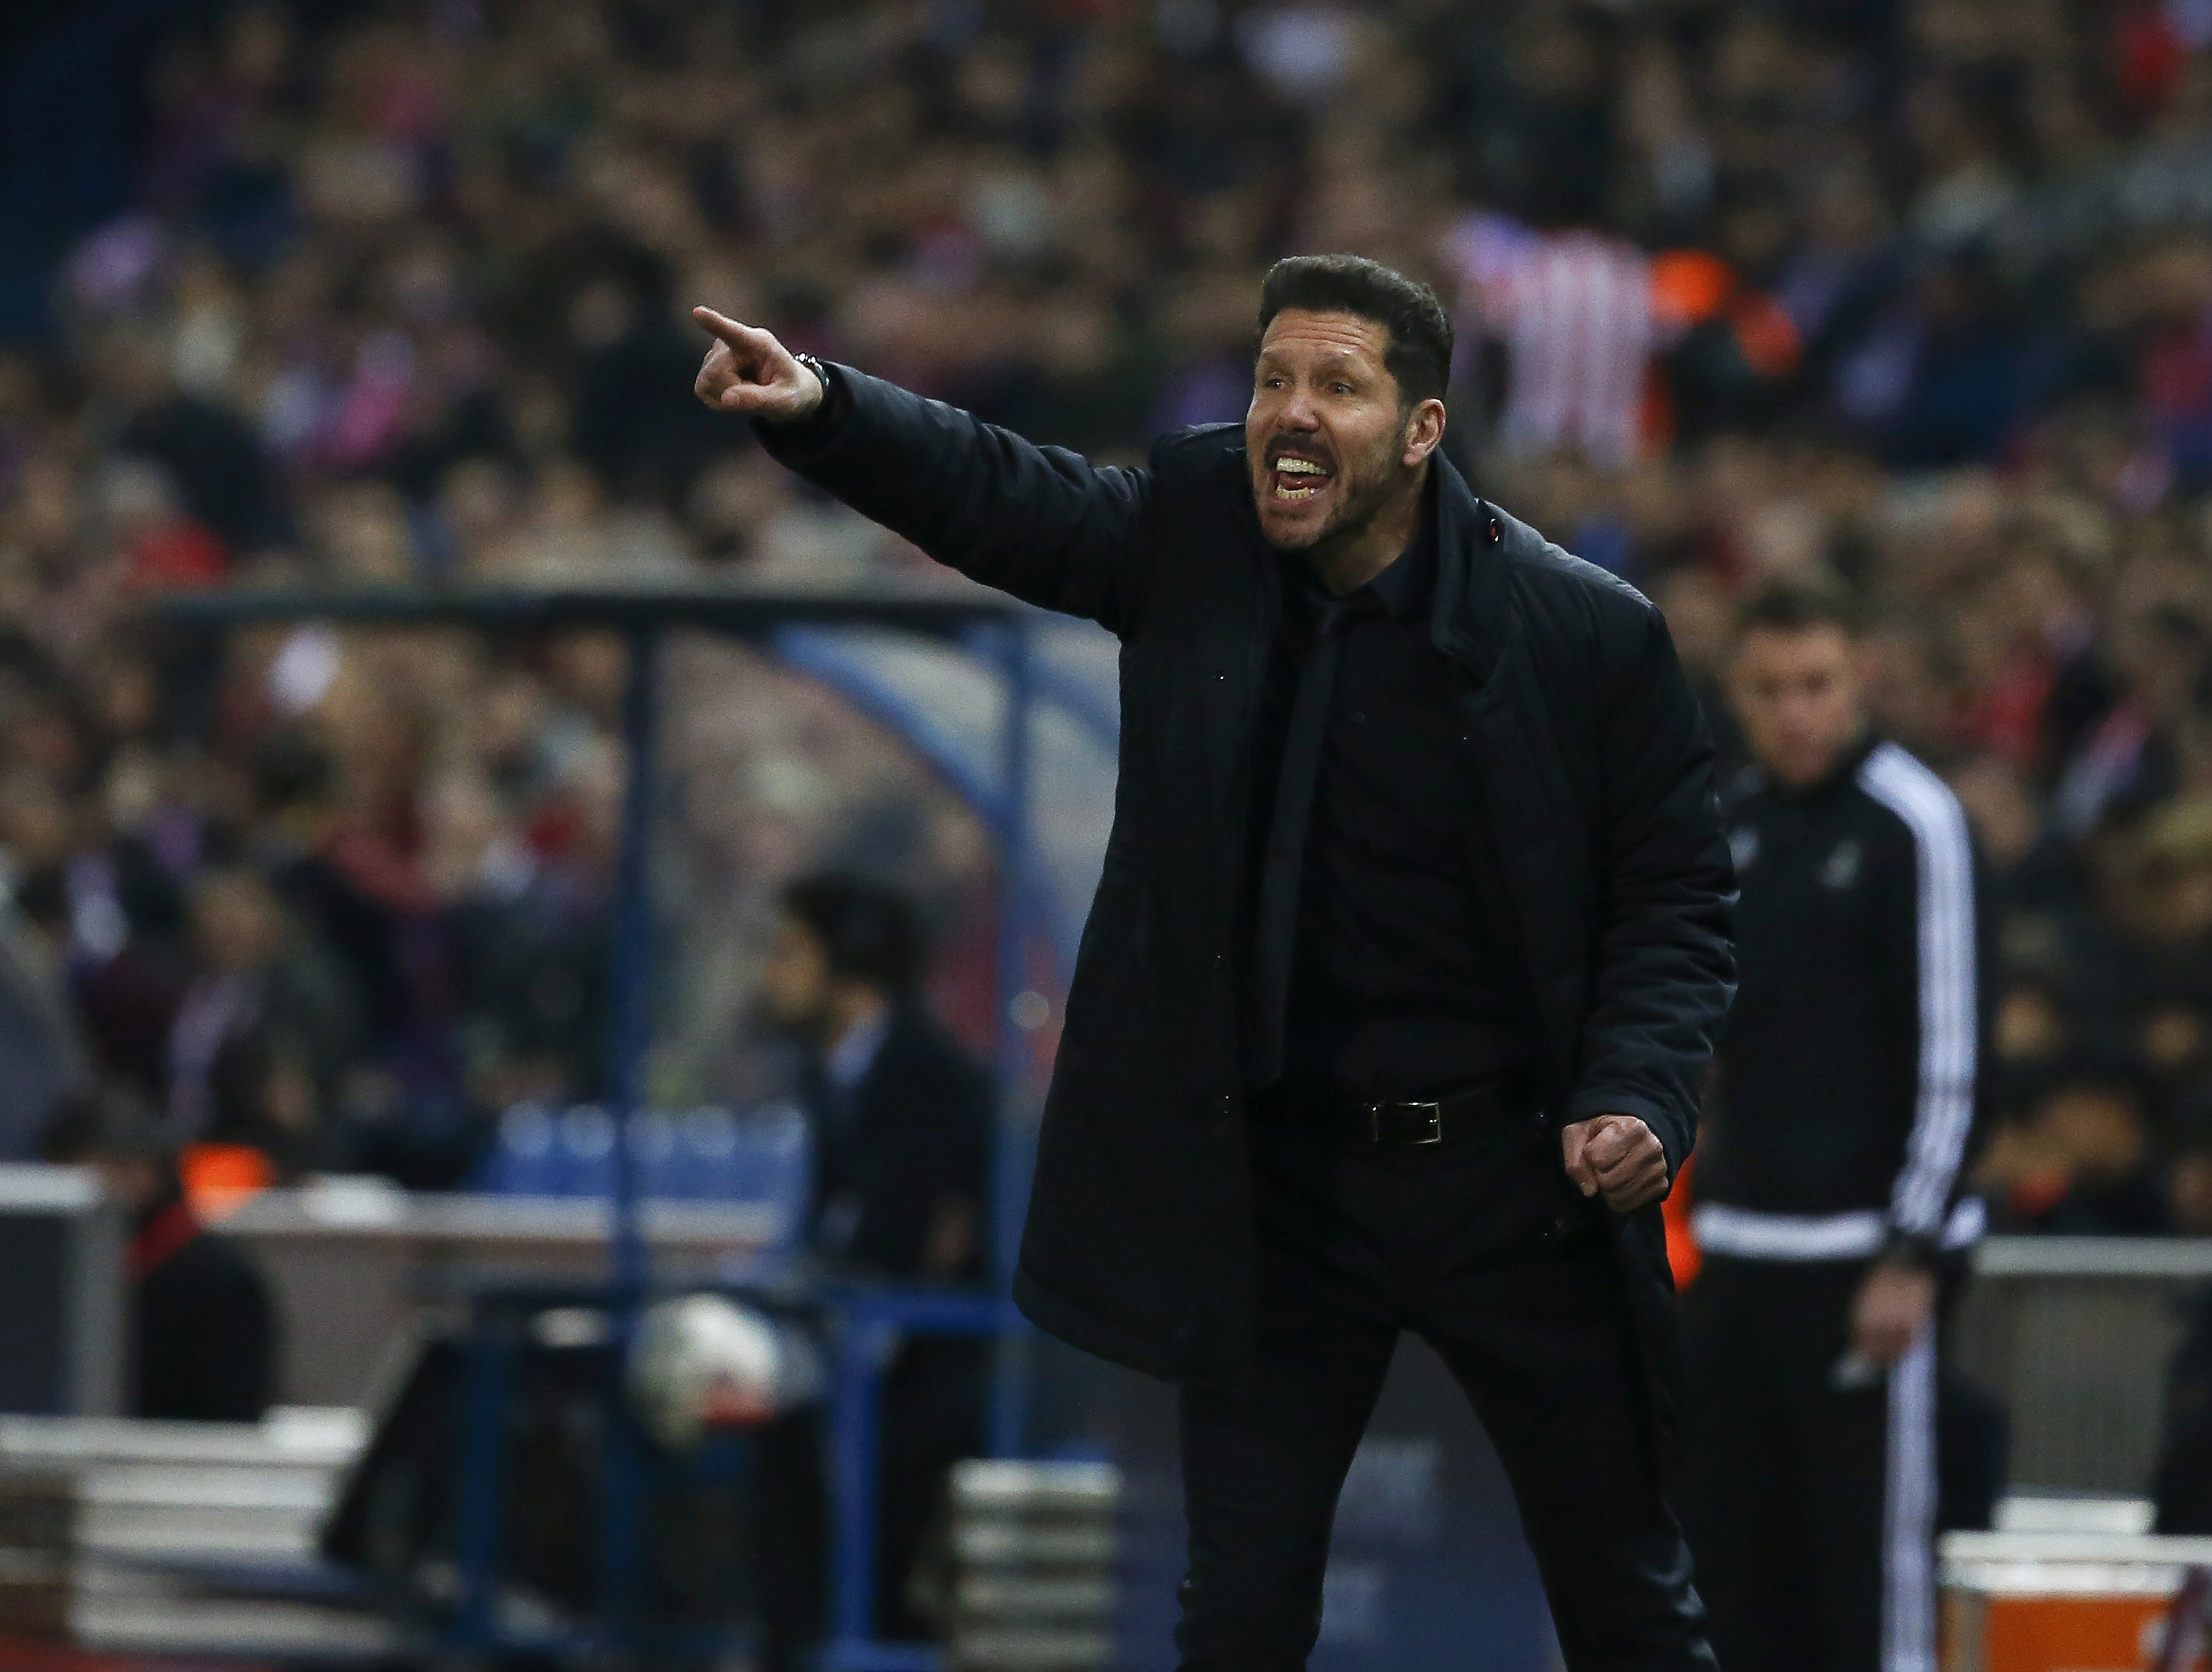 Football Soccer - Atletico Madrid v PSV Eindhoven - UEFA Champions League Round of 16 Second Leg - Vicente Calderon stadium, Madrid, Spain - 15/3/16 Atletico Madrid's coach Diego "Cholo" Simeone gestures during the match. REUTERS/Sergio Perez